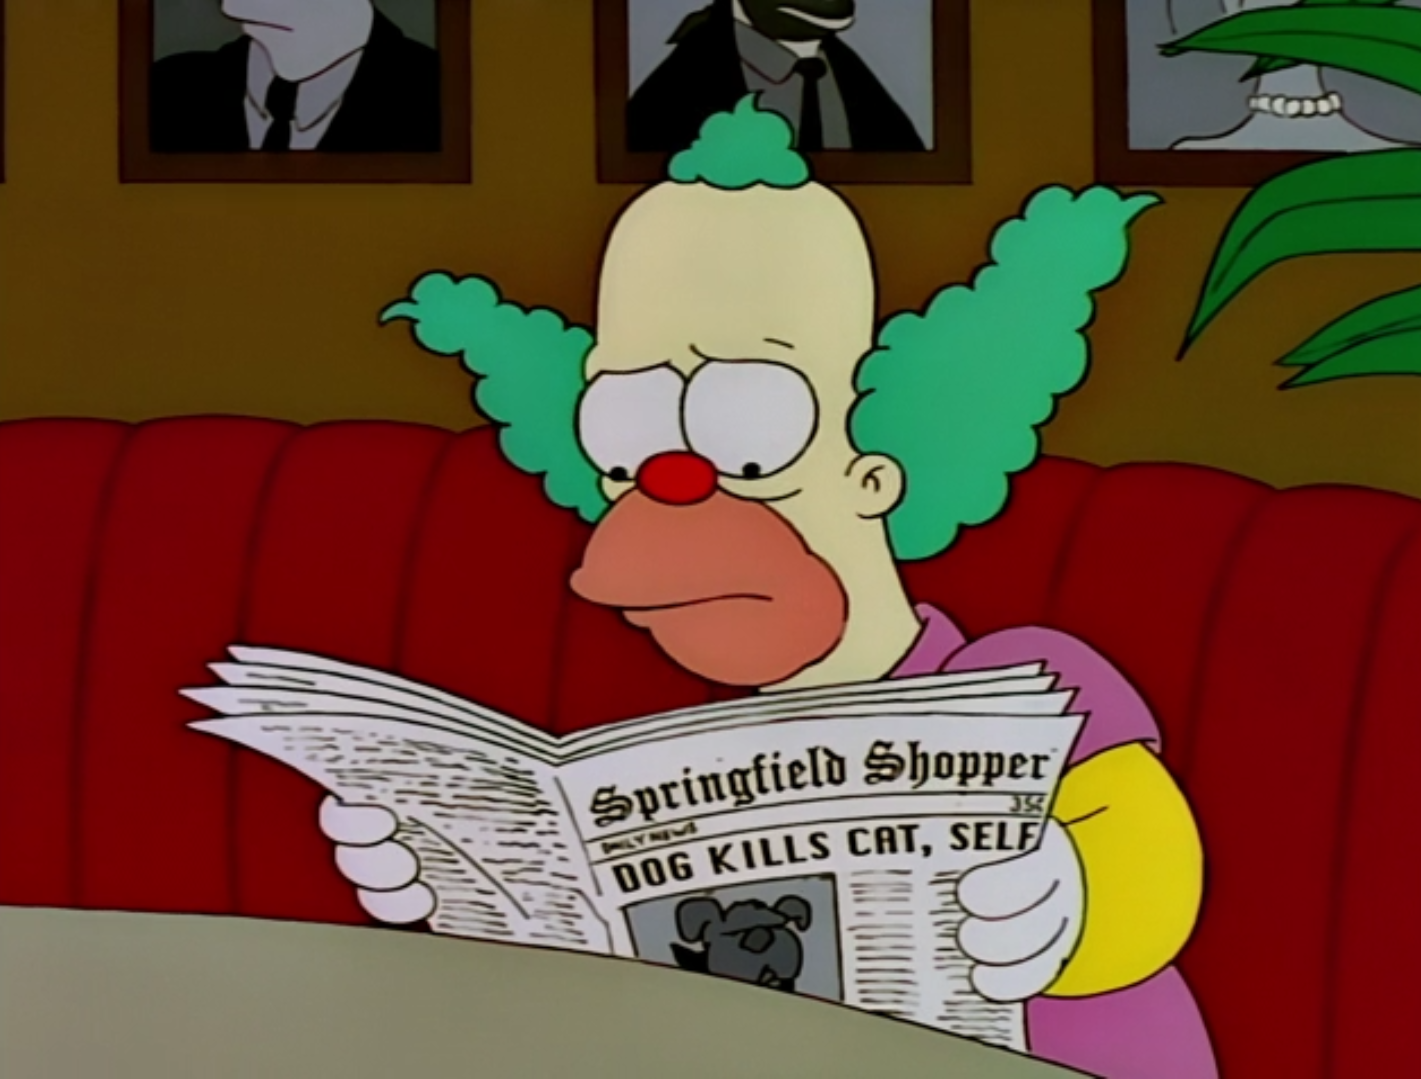 Dog kills cat, Self.png Wikisimpsons, the Simpsons Wiki